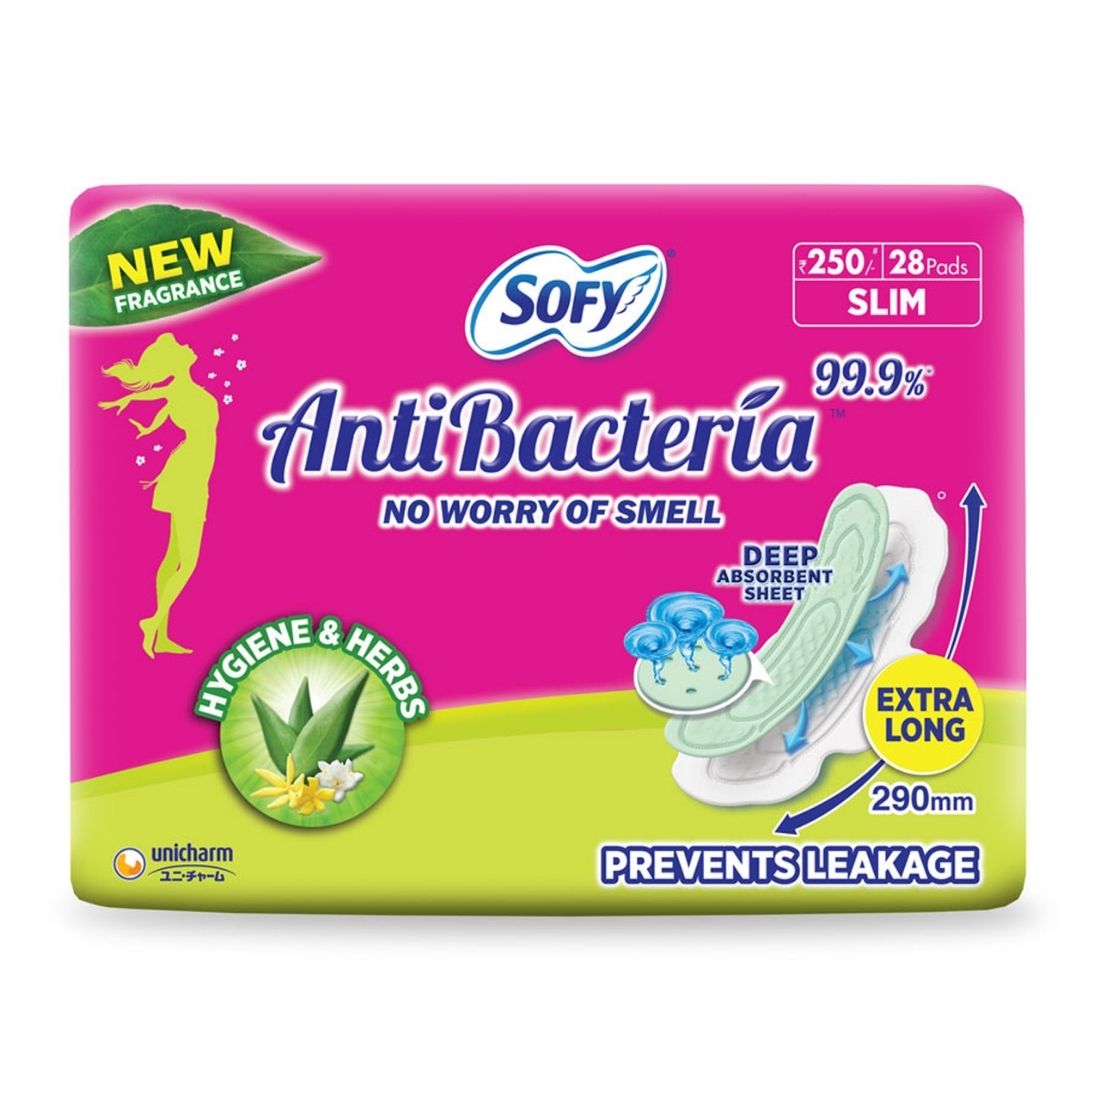 Buy new Sofy AntiBacteria with deep absorbent sheet that prevents leakage and gives you 99.9% protection from bacteria that causes smell.